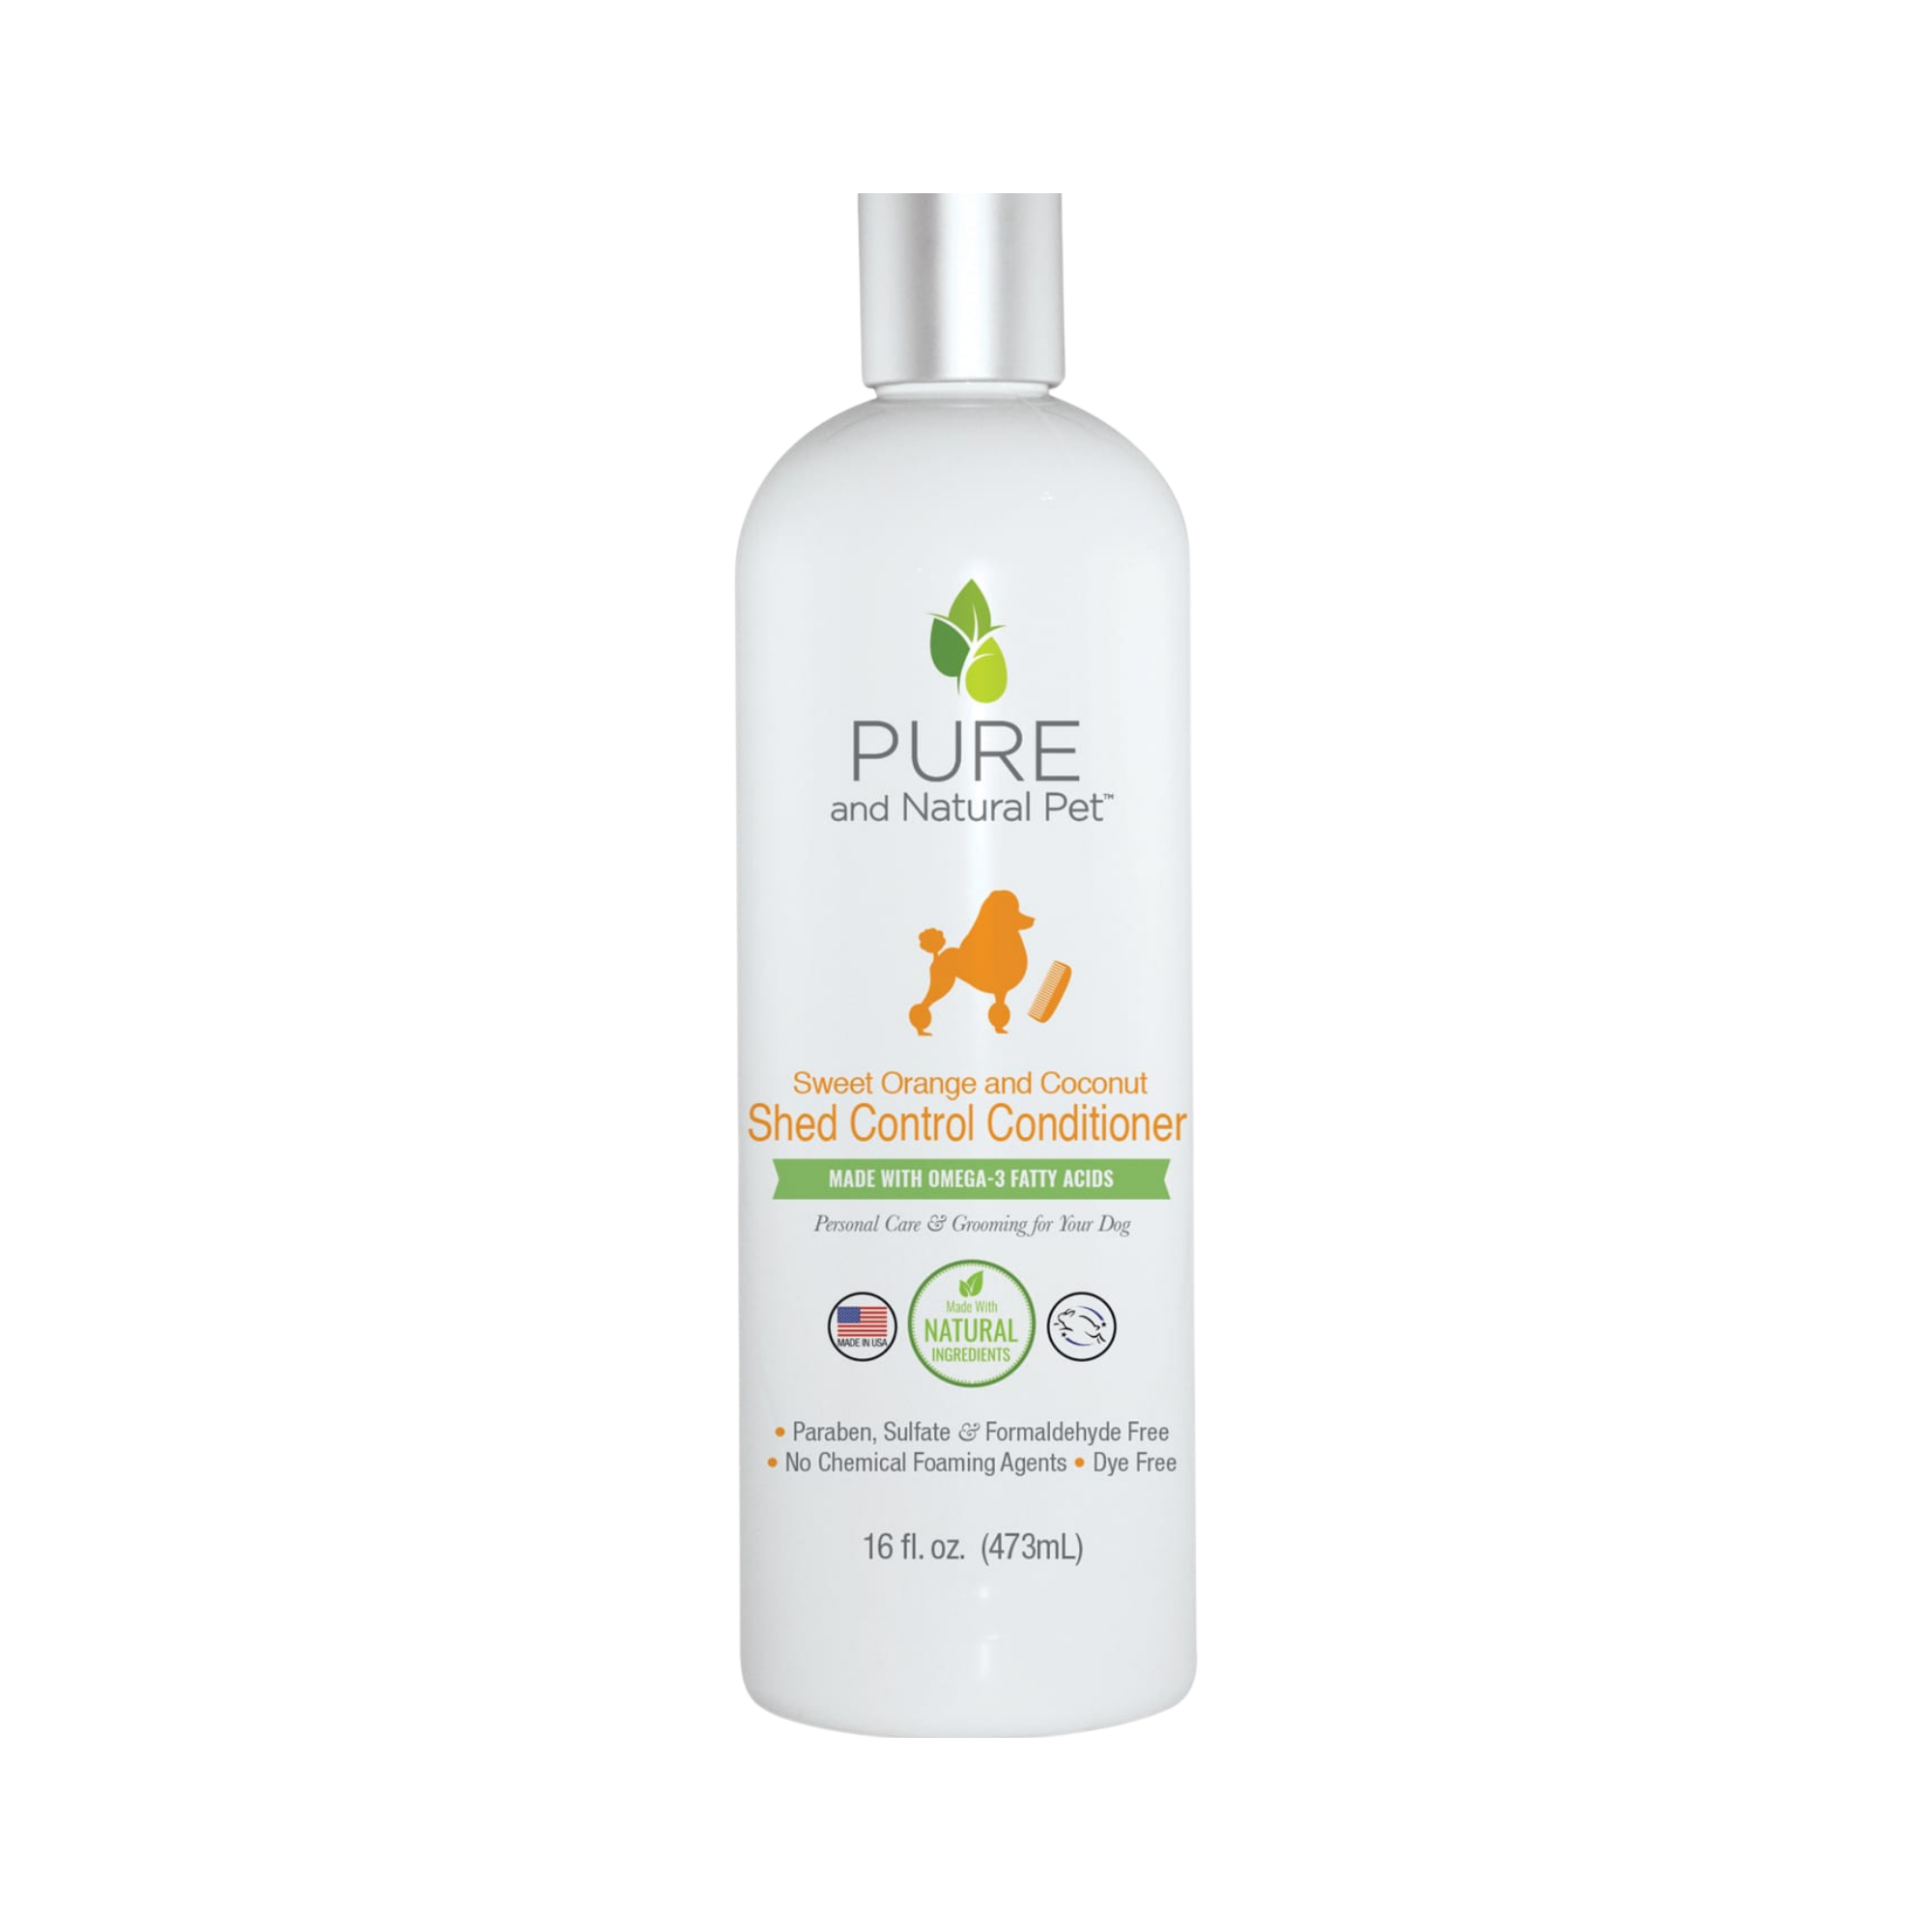 Pure and Natural Pet Shed Control 3 in 1 Shampoo & Conditioner 16 oz - Mutts & Co.